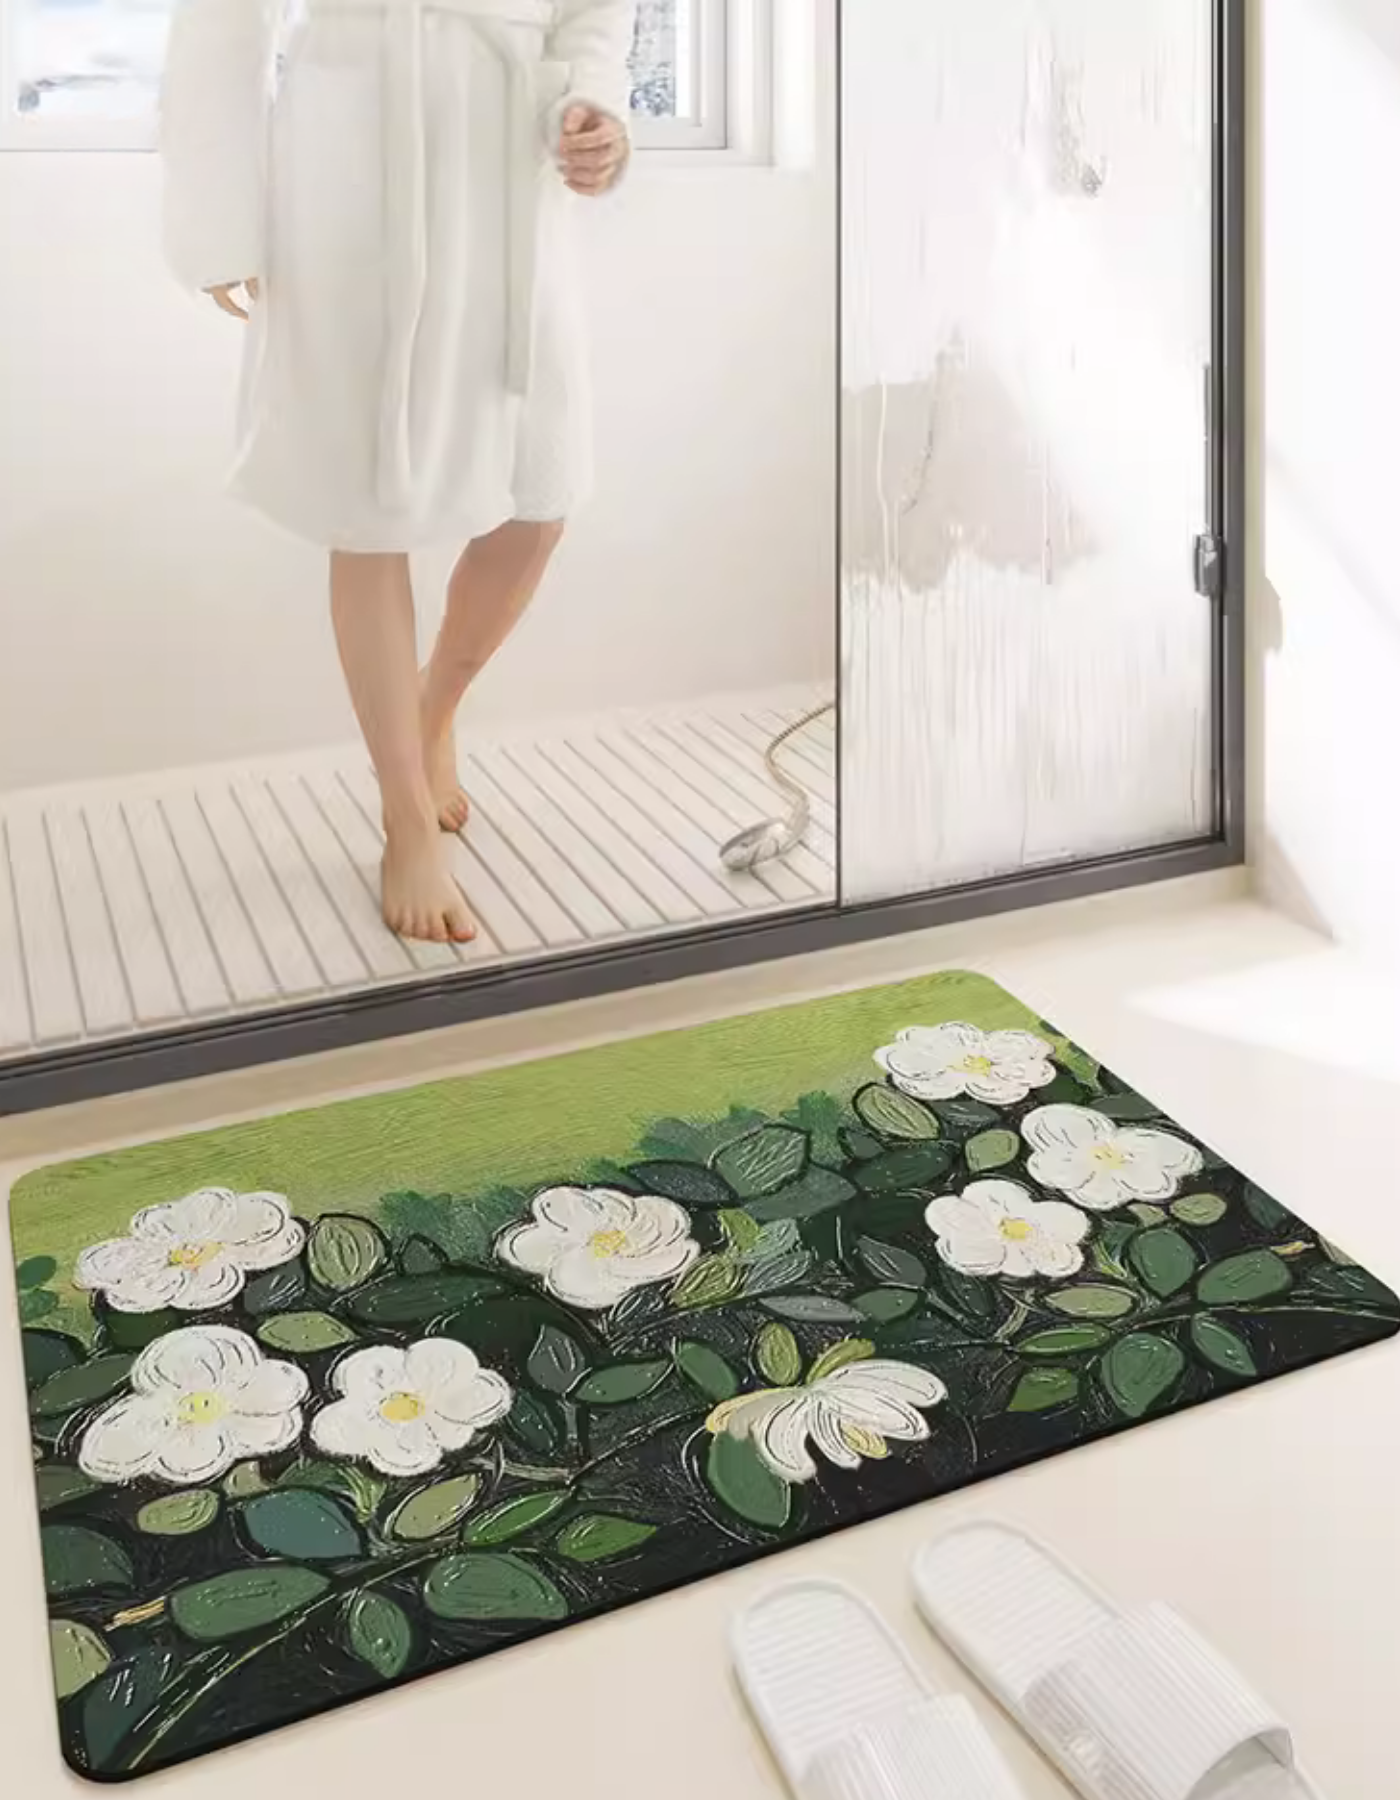 Rose Oval Bathroom Rug Bathmat, Water Absorbent And Non-slip